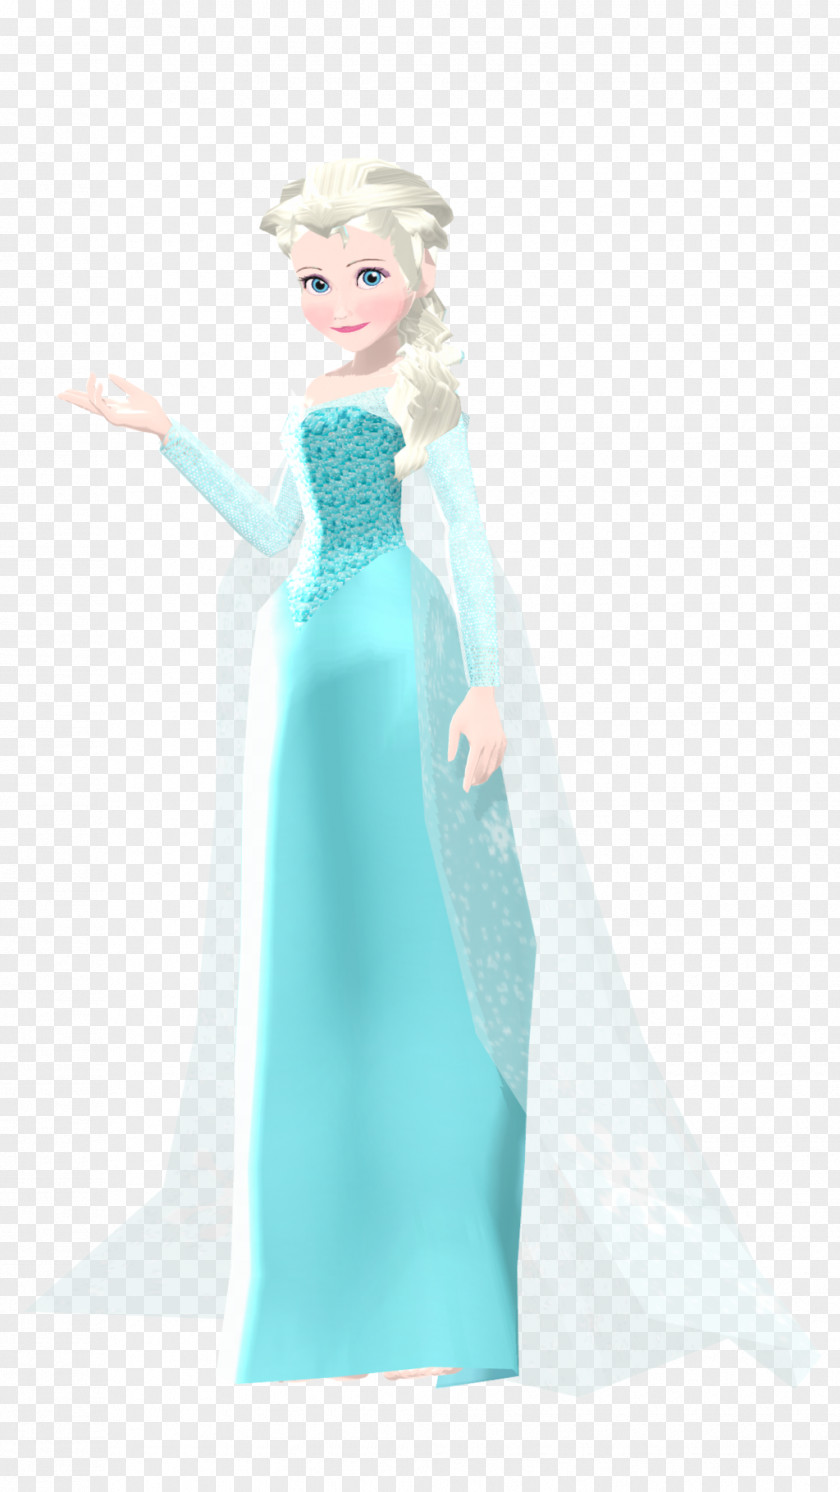 Elsa Dress Barbie Turquoise Doll Gown PNG